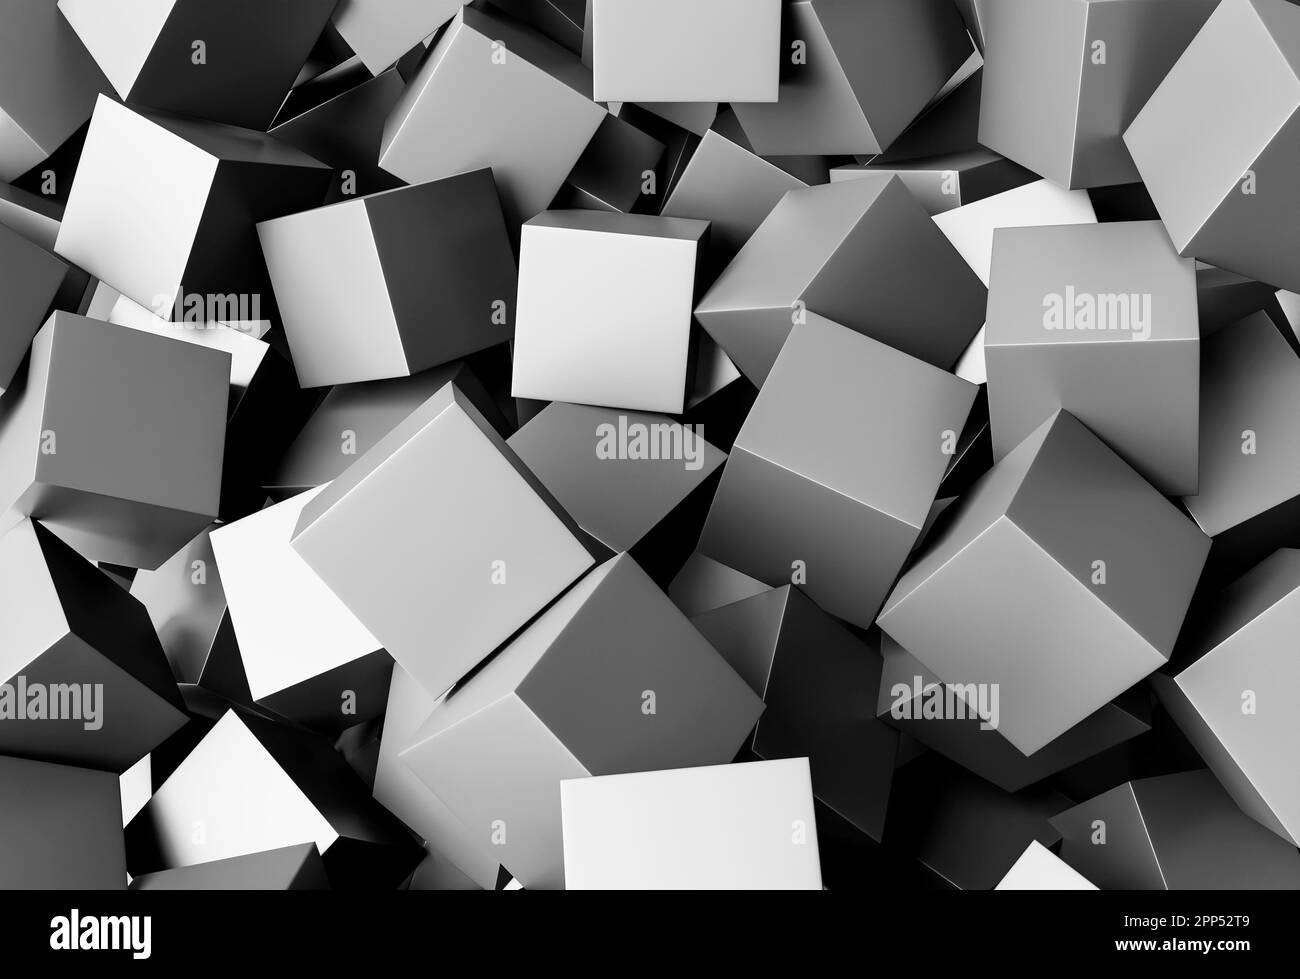 Creative wallpaper with grey cubes Stock Photo